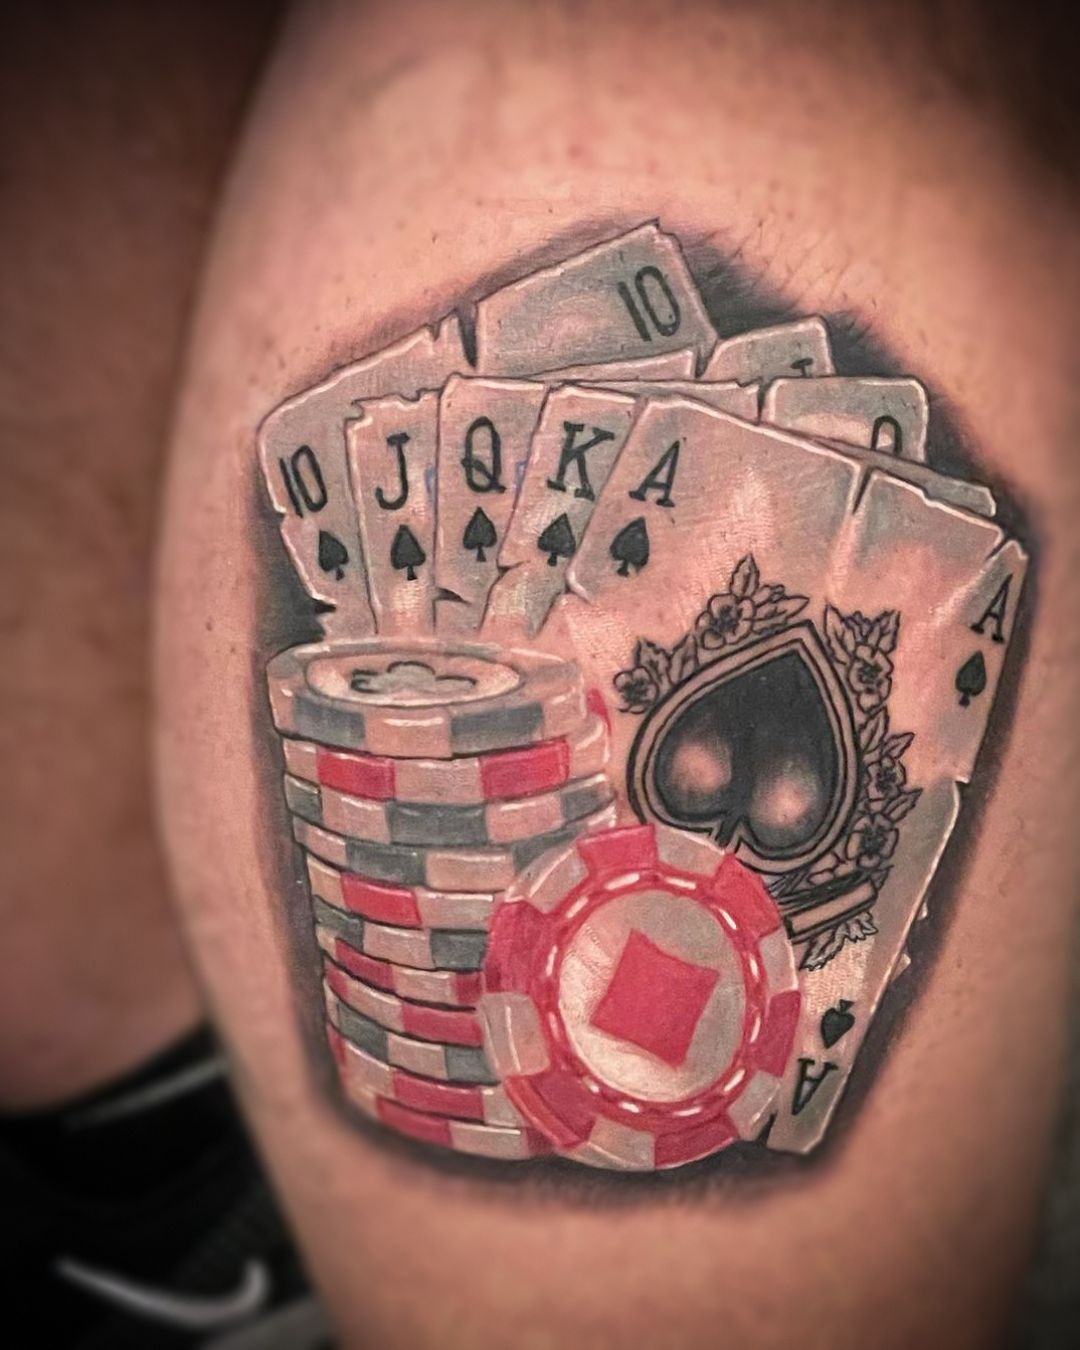 Poker Tattoos How To Decide What To Get